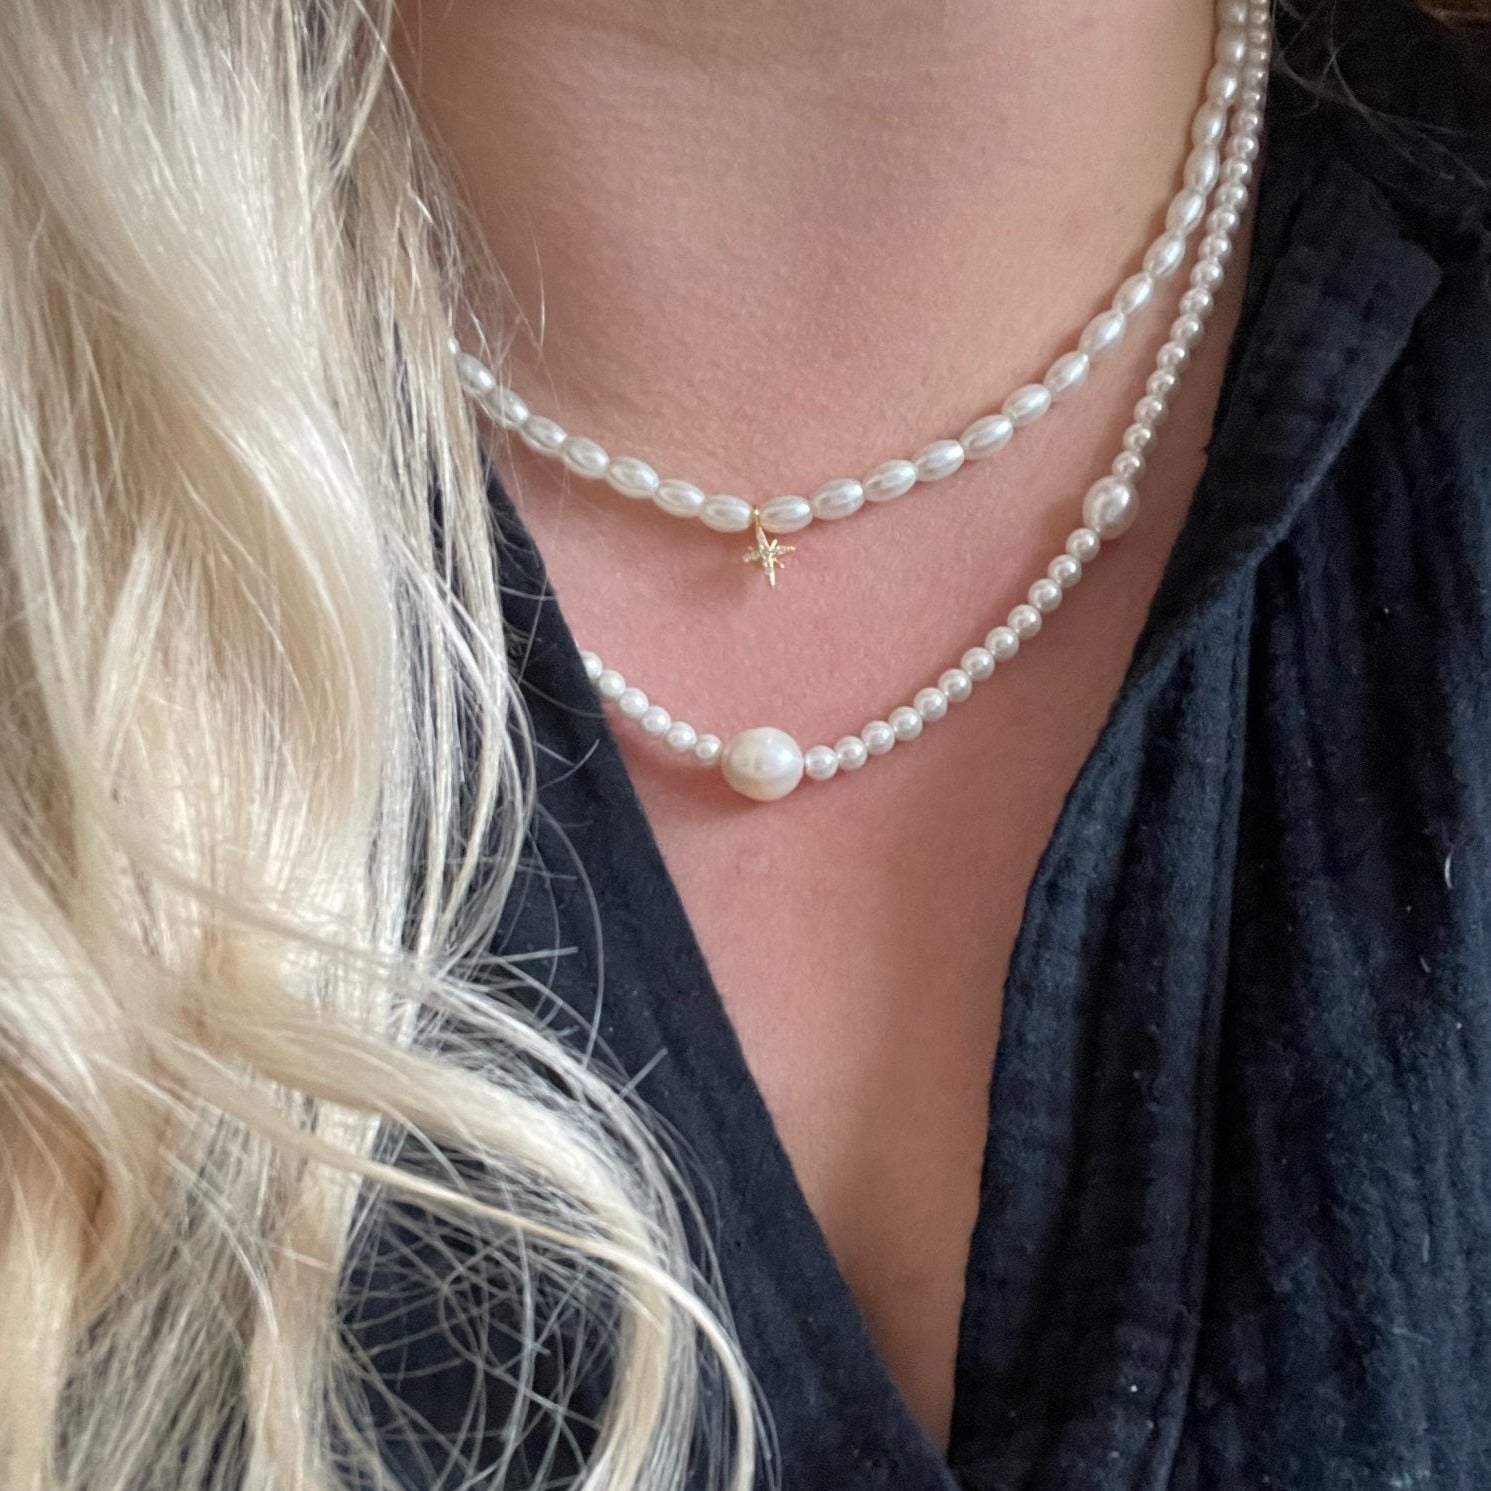 A woman wearing layered pearl necklaces.